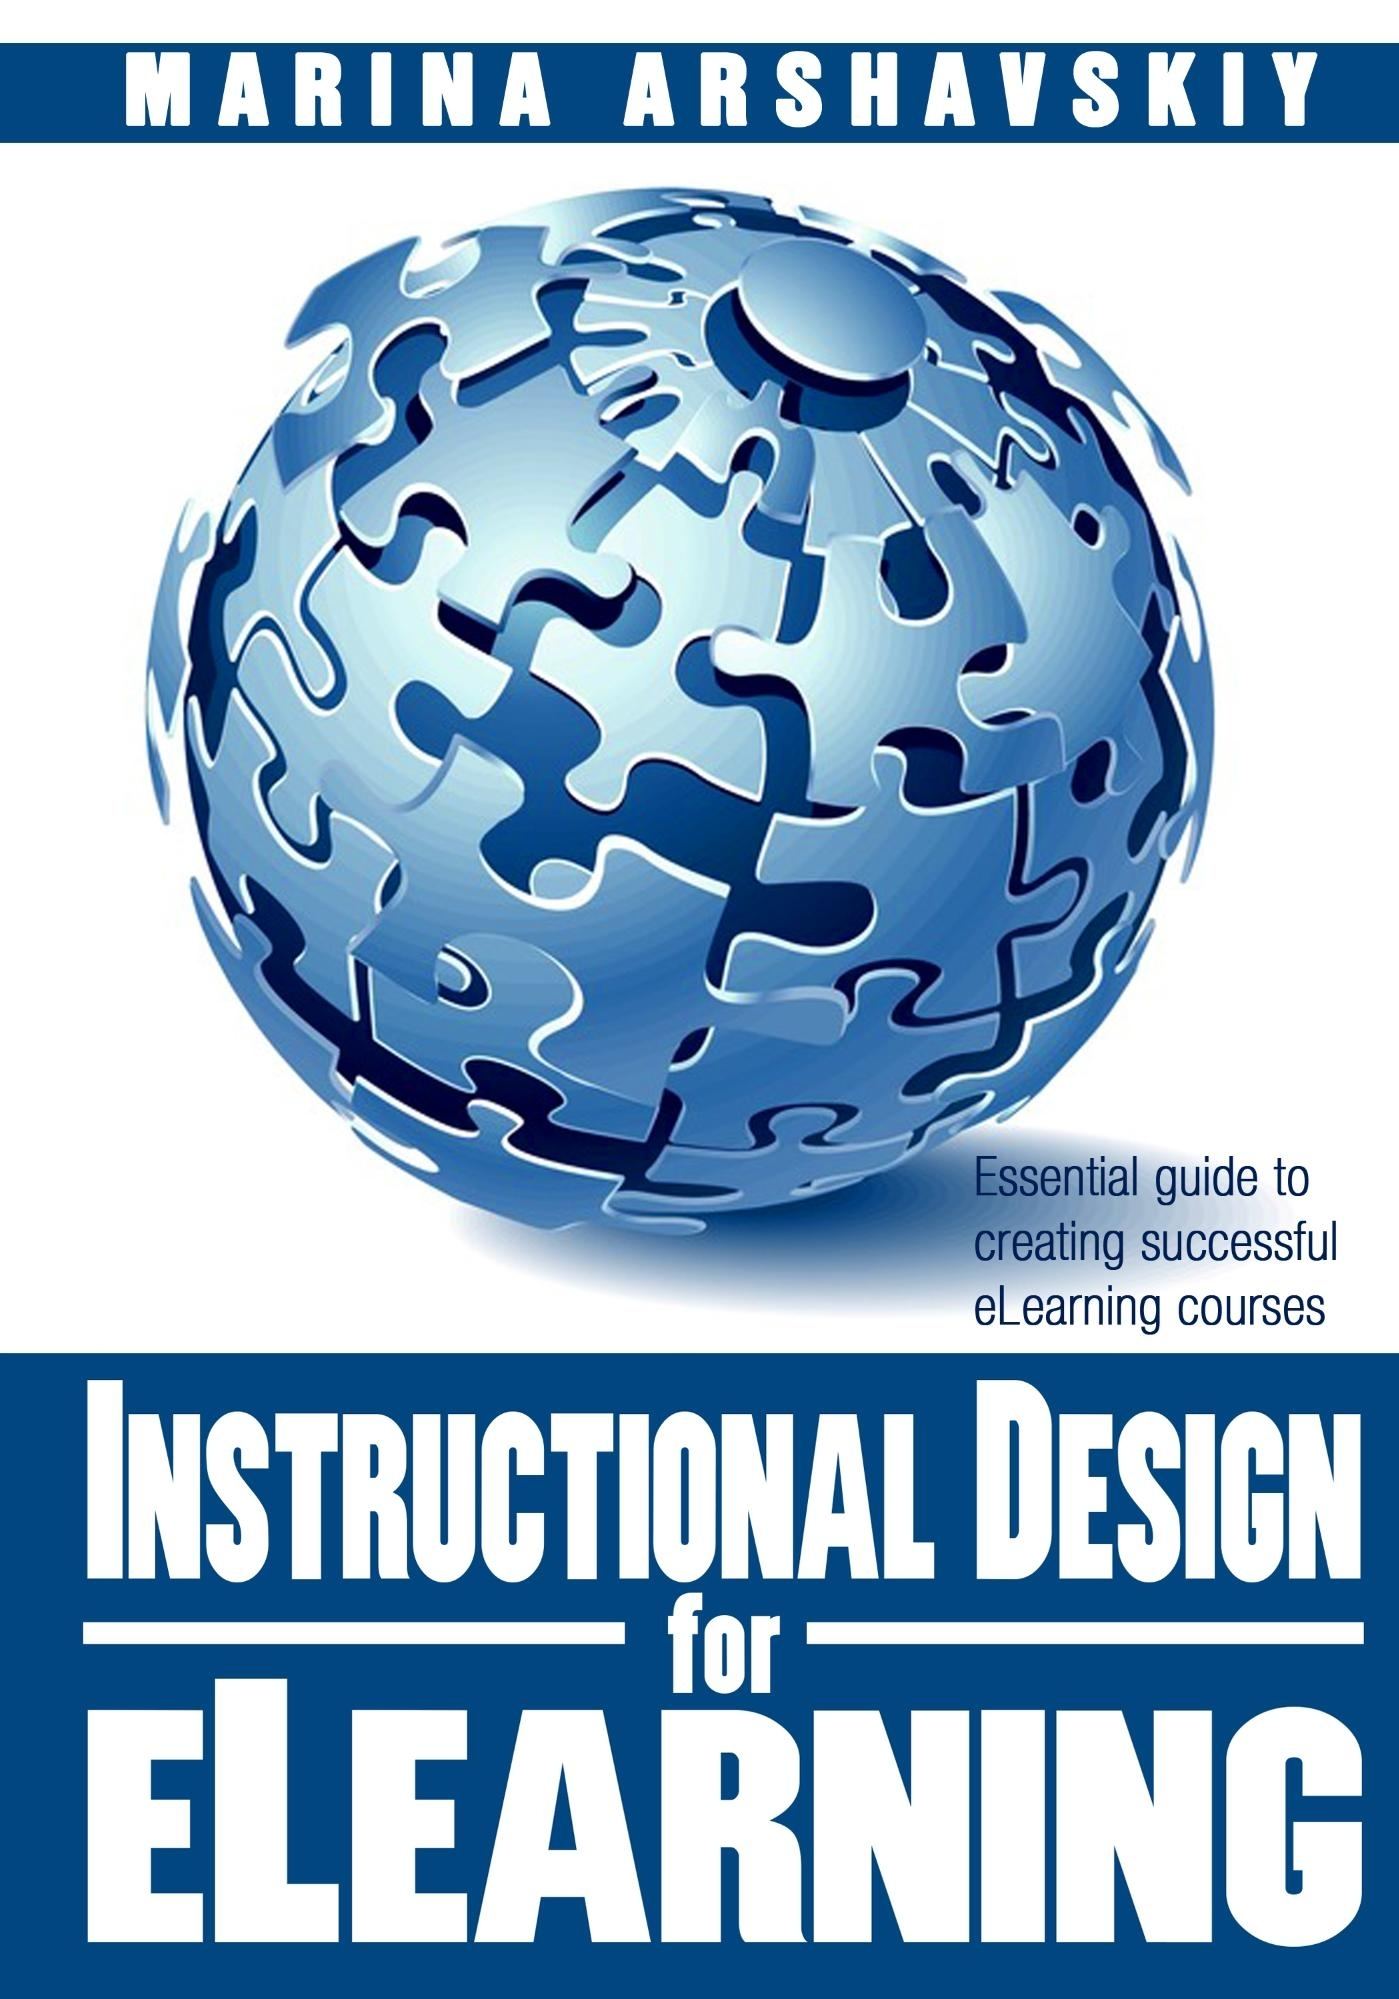 The Instructional Design for eLearning Book Review